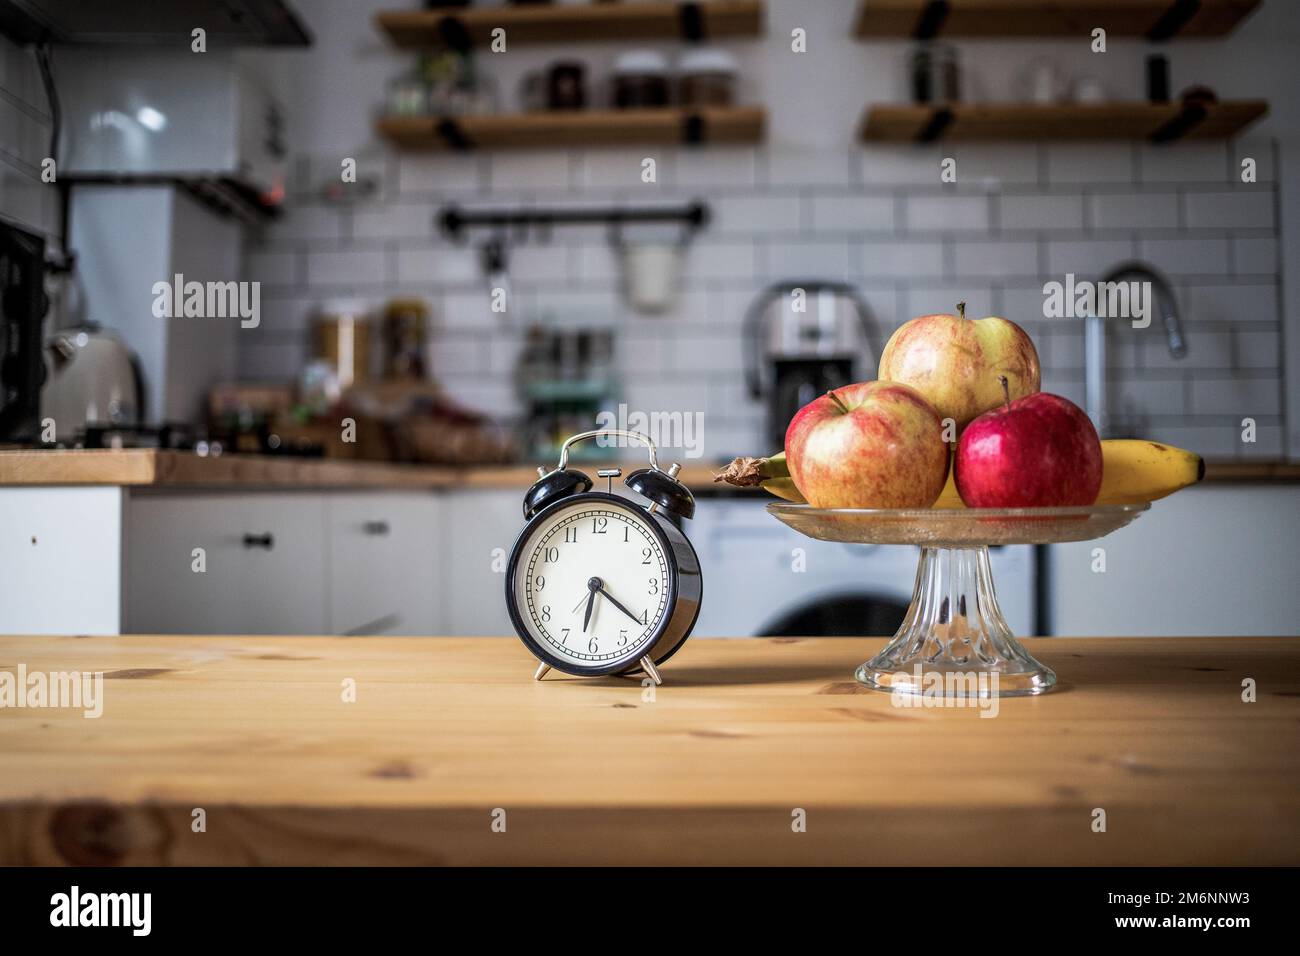 Vintage alarm clock and fresh fruit on kitchen table intermittent fasting Stock Photo